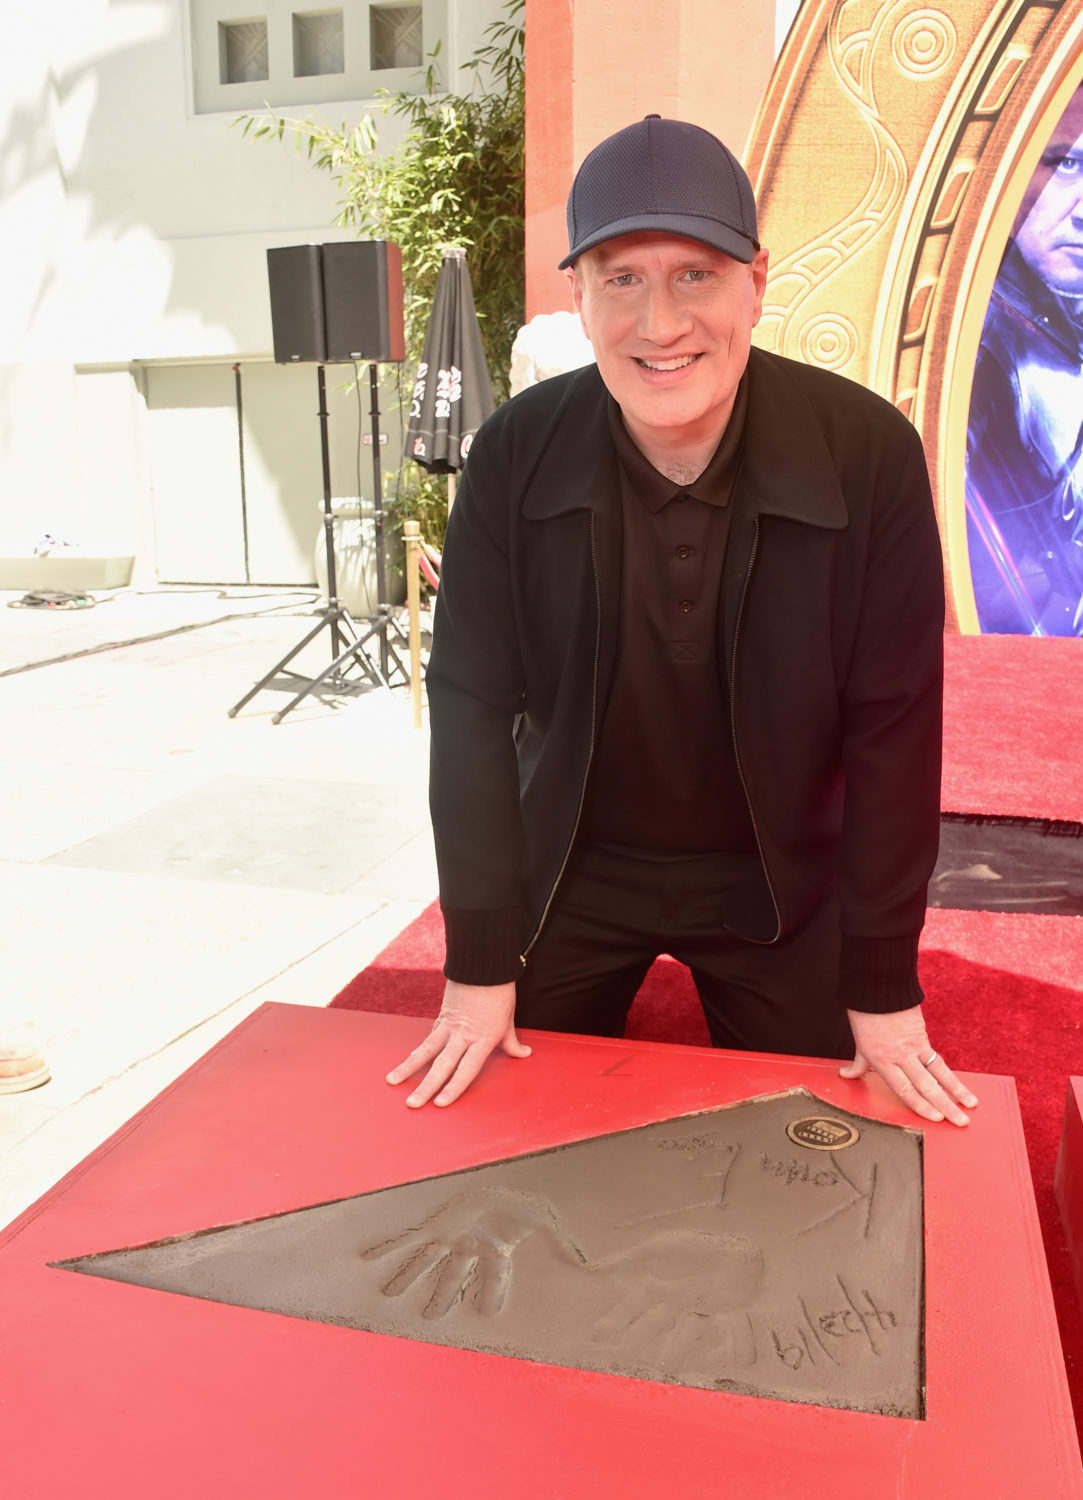 Kevin Feige, Original Six Avengers Leave Handprints at TLC Chinese